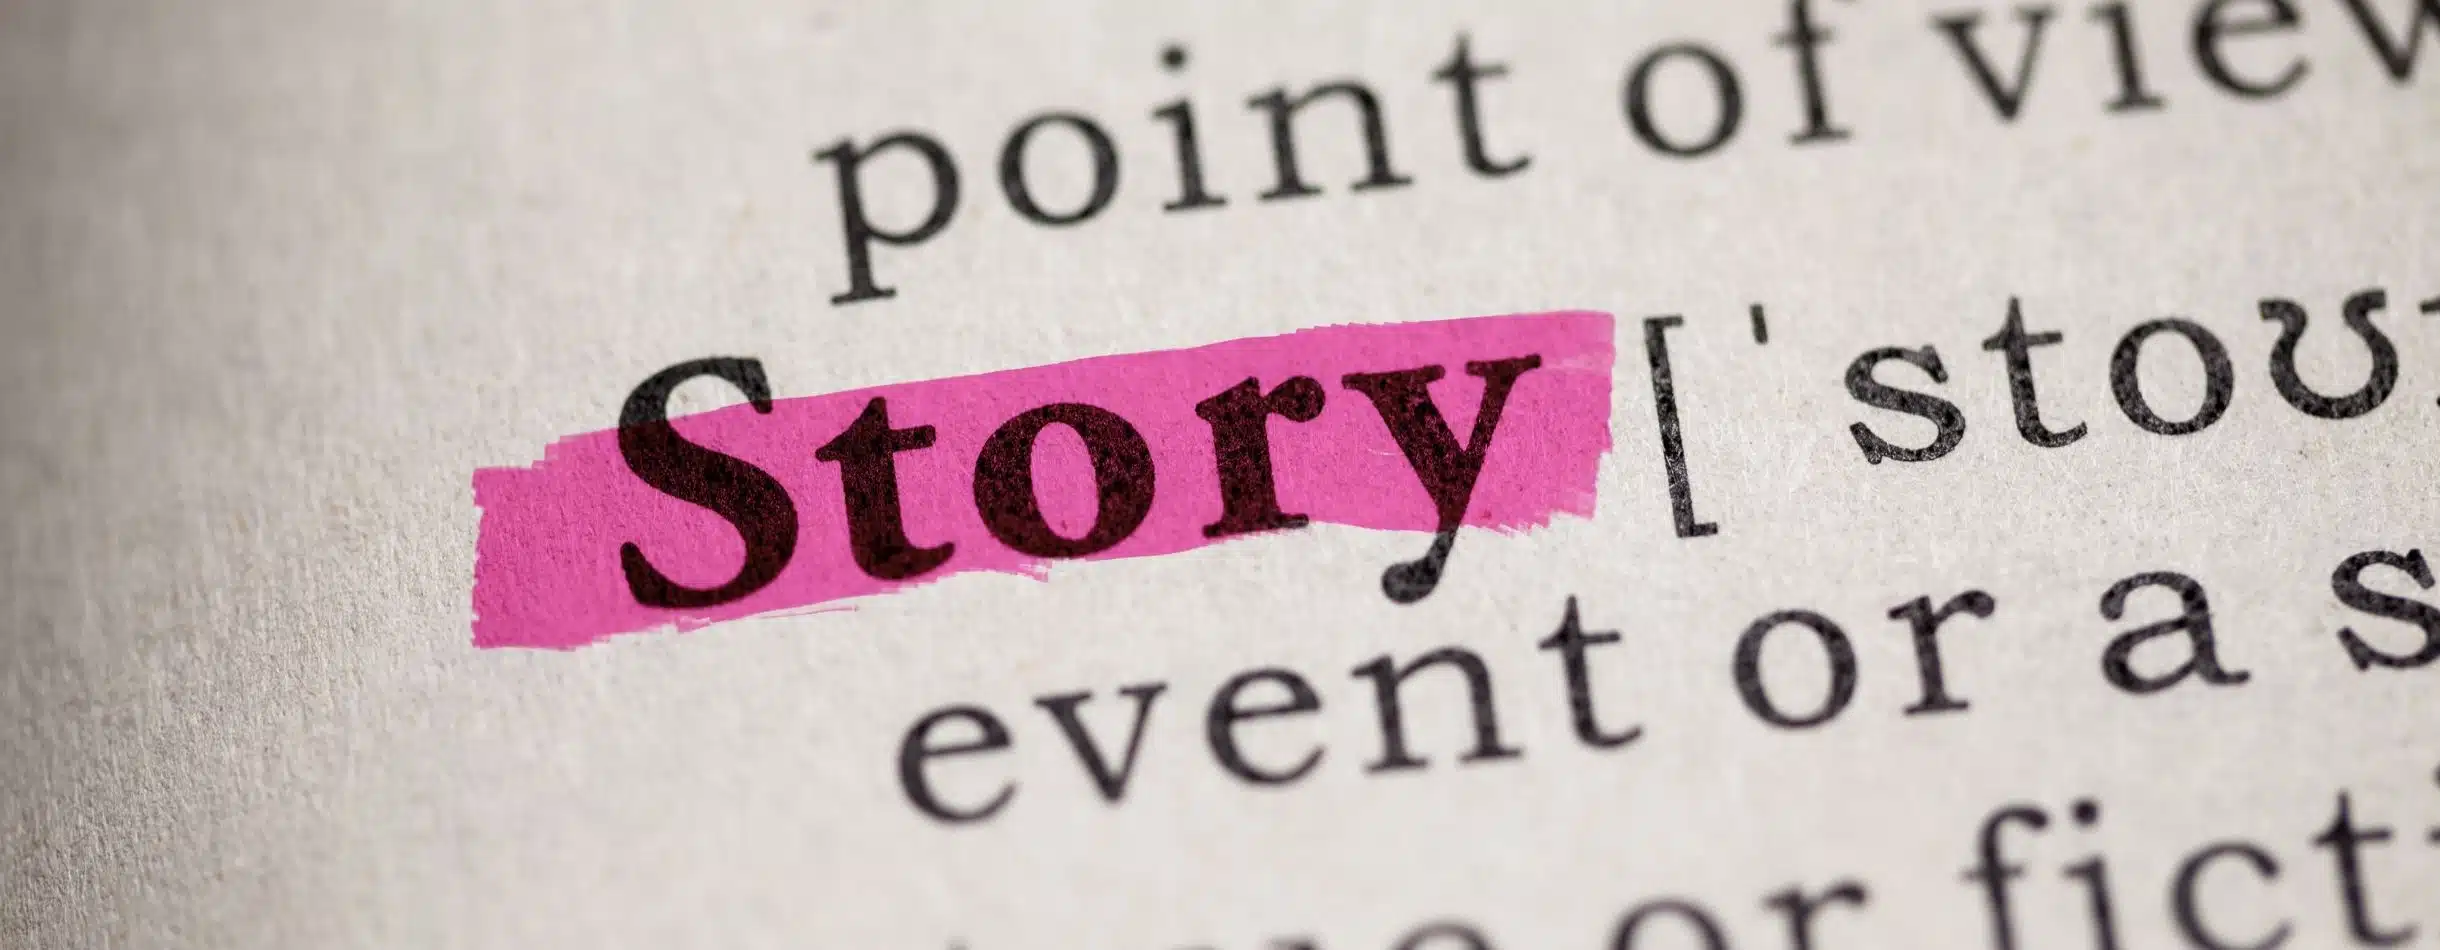 A dictionary lays out with the word Story highlighted in purple. It's used to emphasize the word Story alone rather than a full definition.